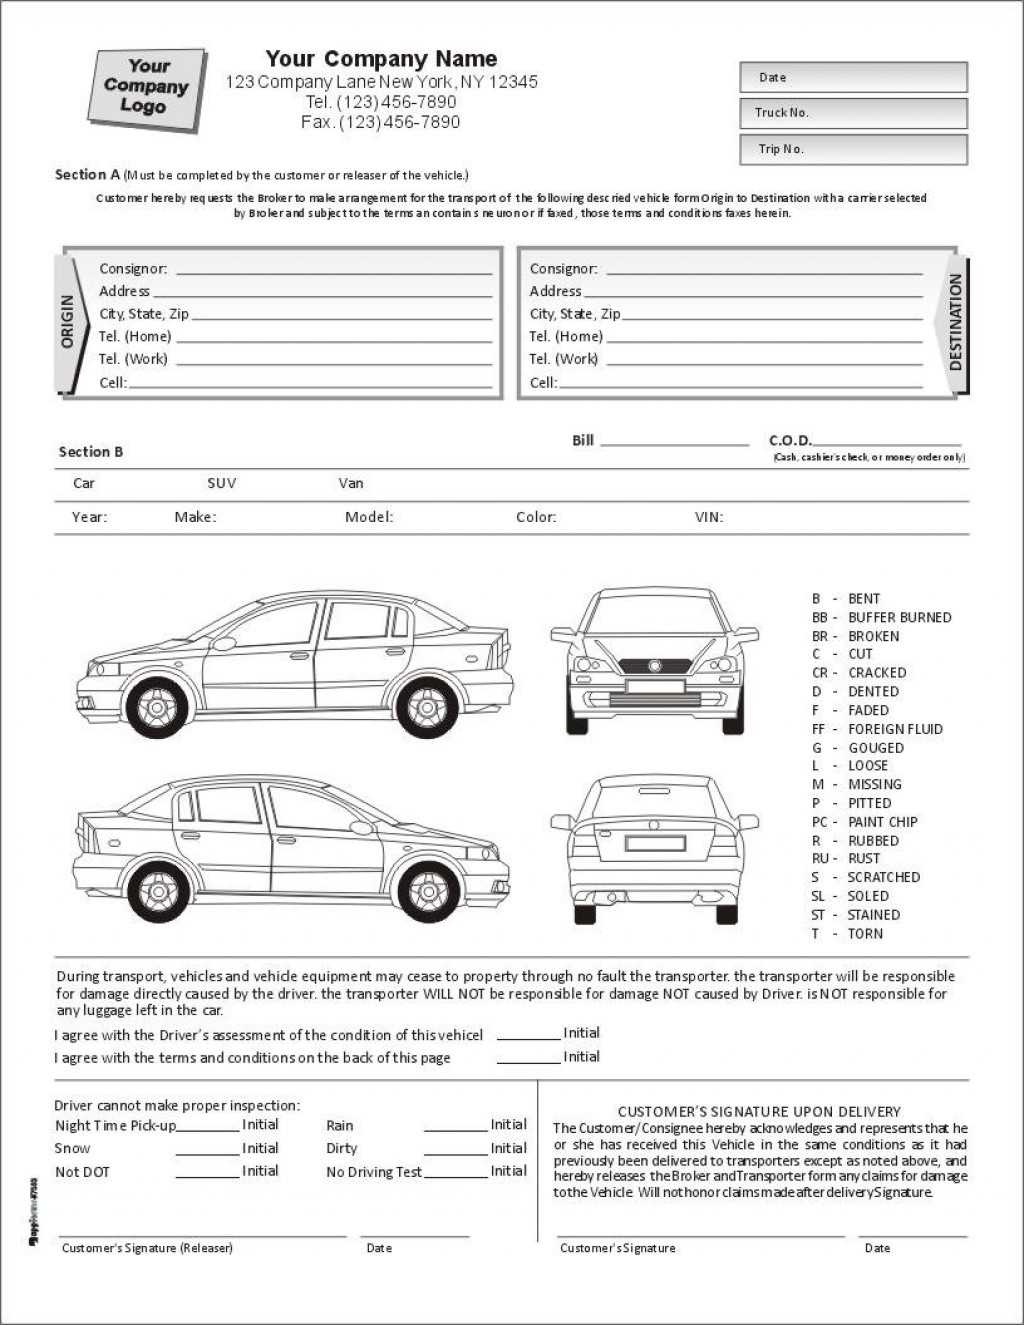 309B3B9 Vehicle Damage Report Template | Wiring Library With Truck Condition Report Template